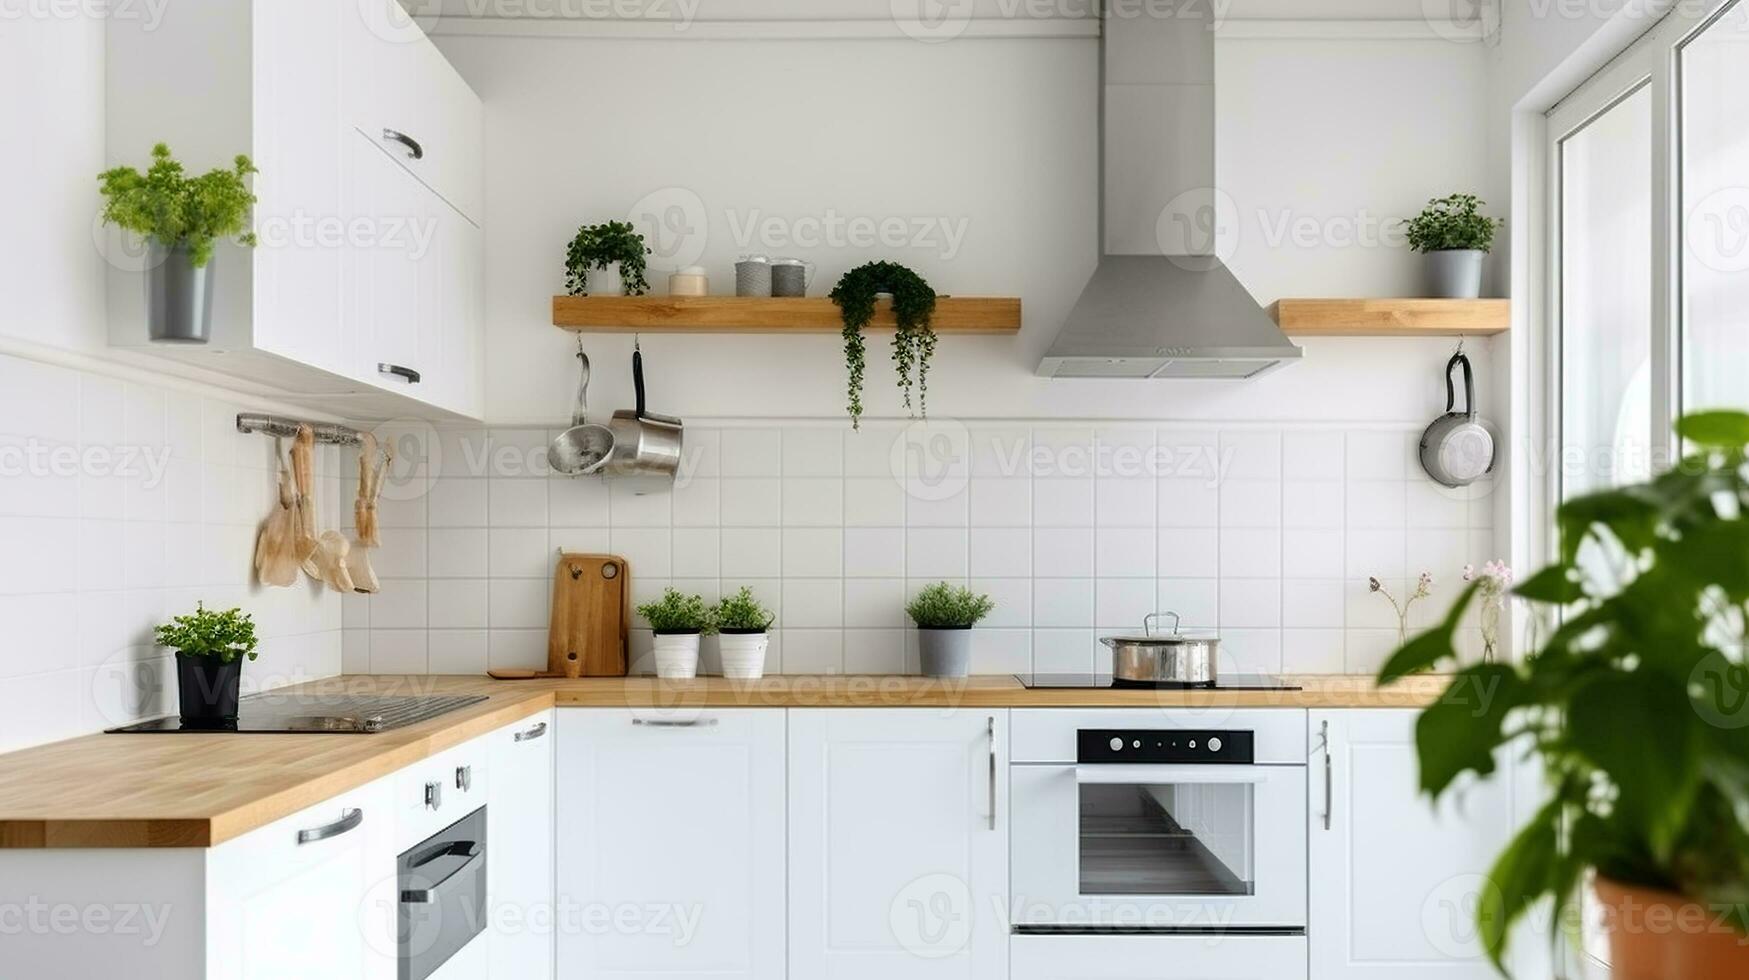 Sleek Elegance. Silver Cooker Hood in Minimalist White Kitchen with Natural Touches photo